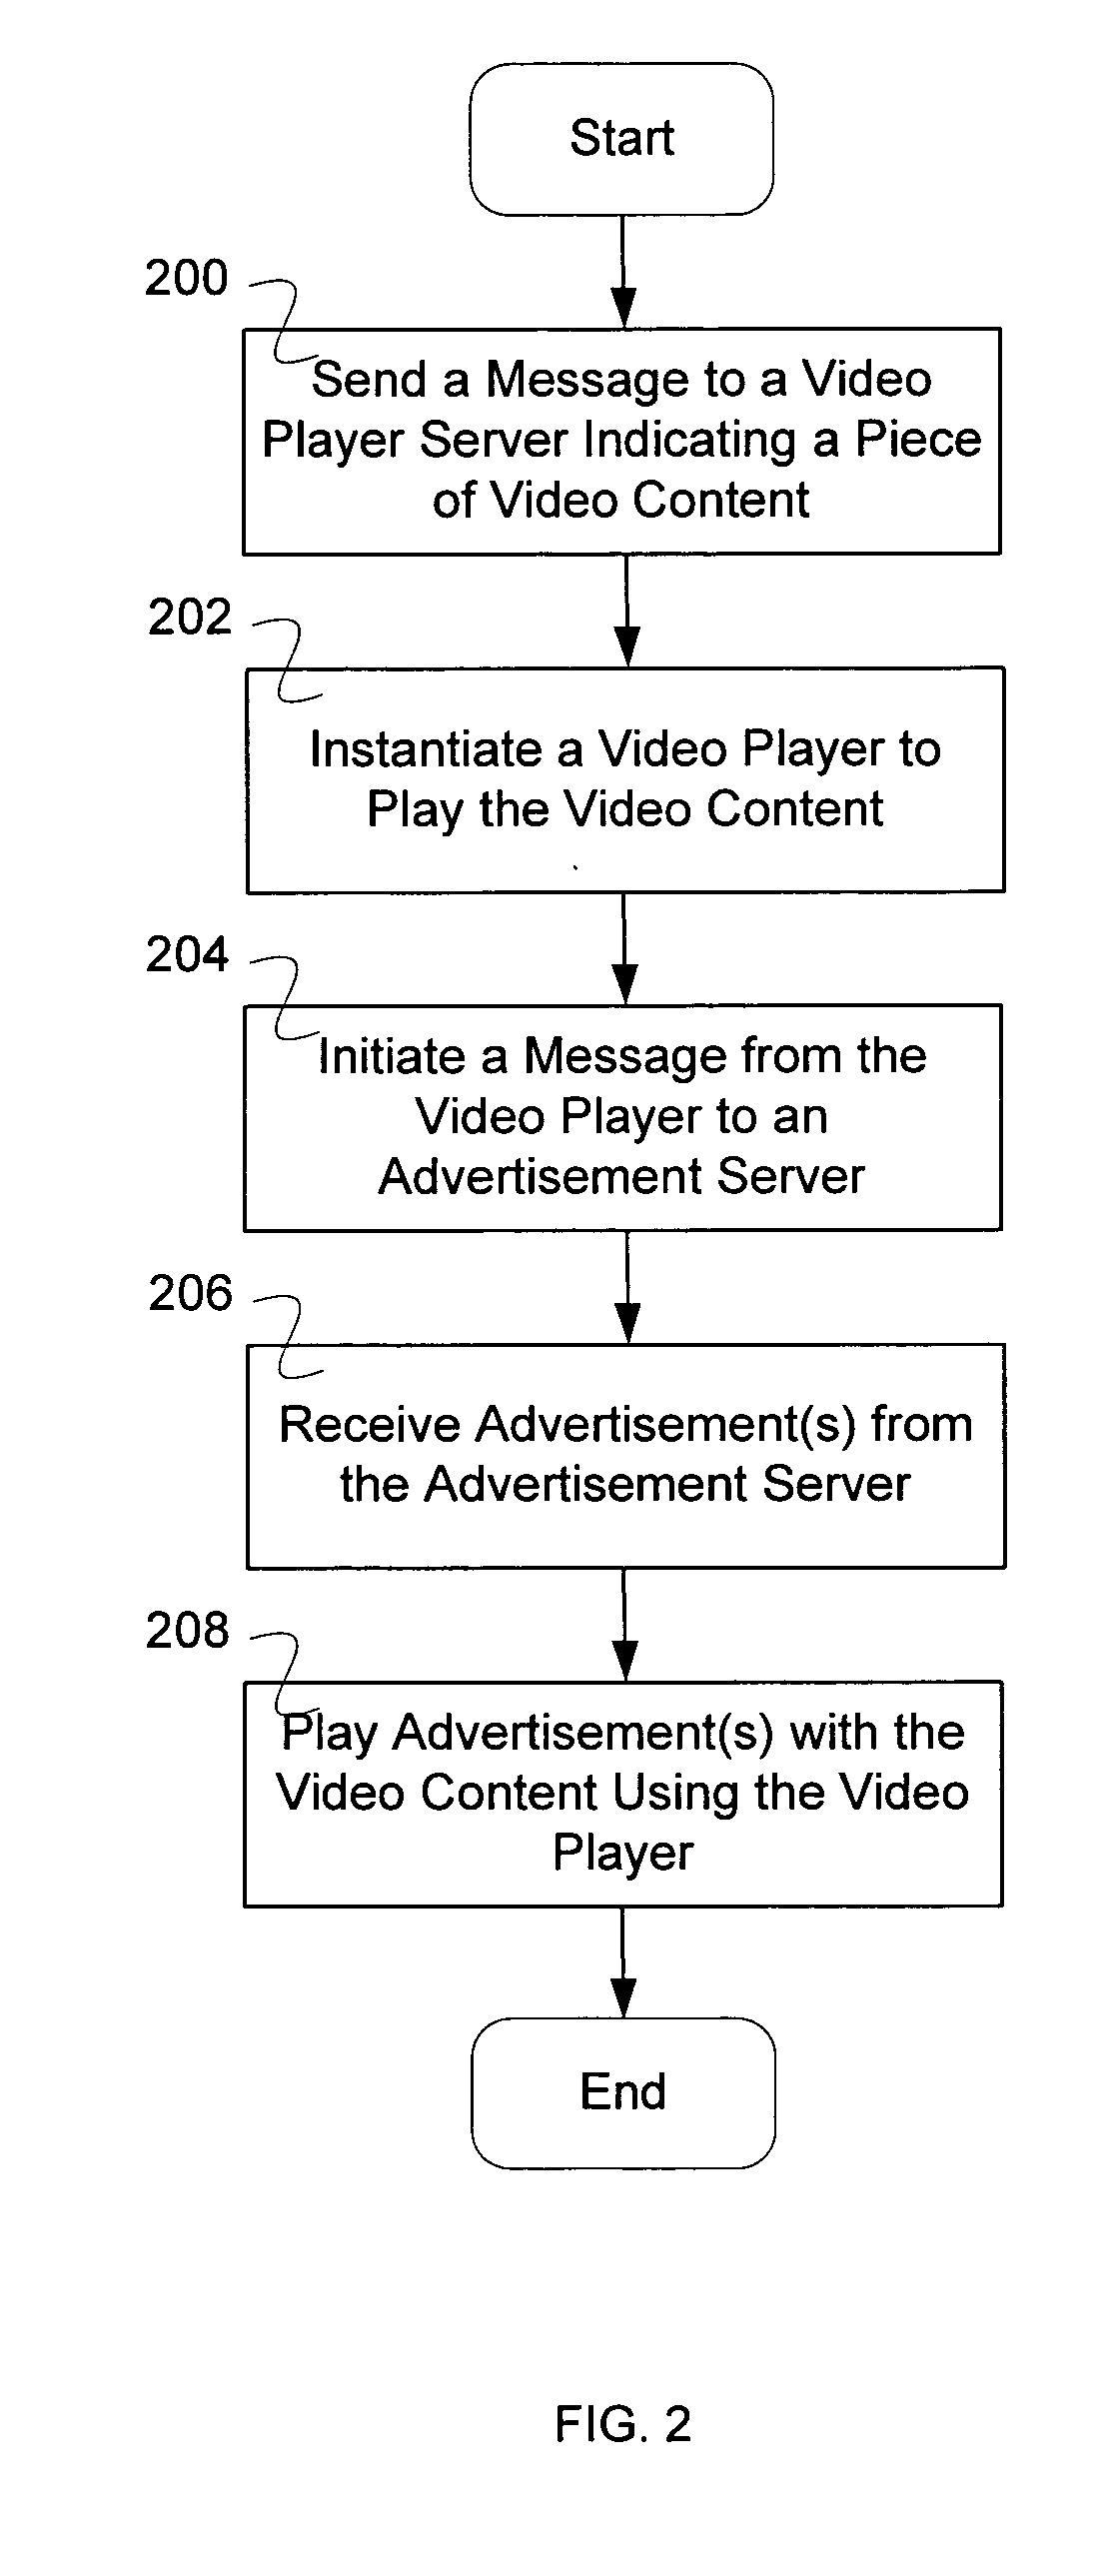 Playing video content with advertisement